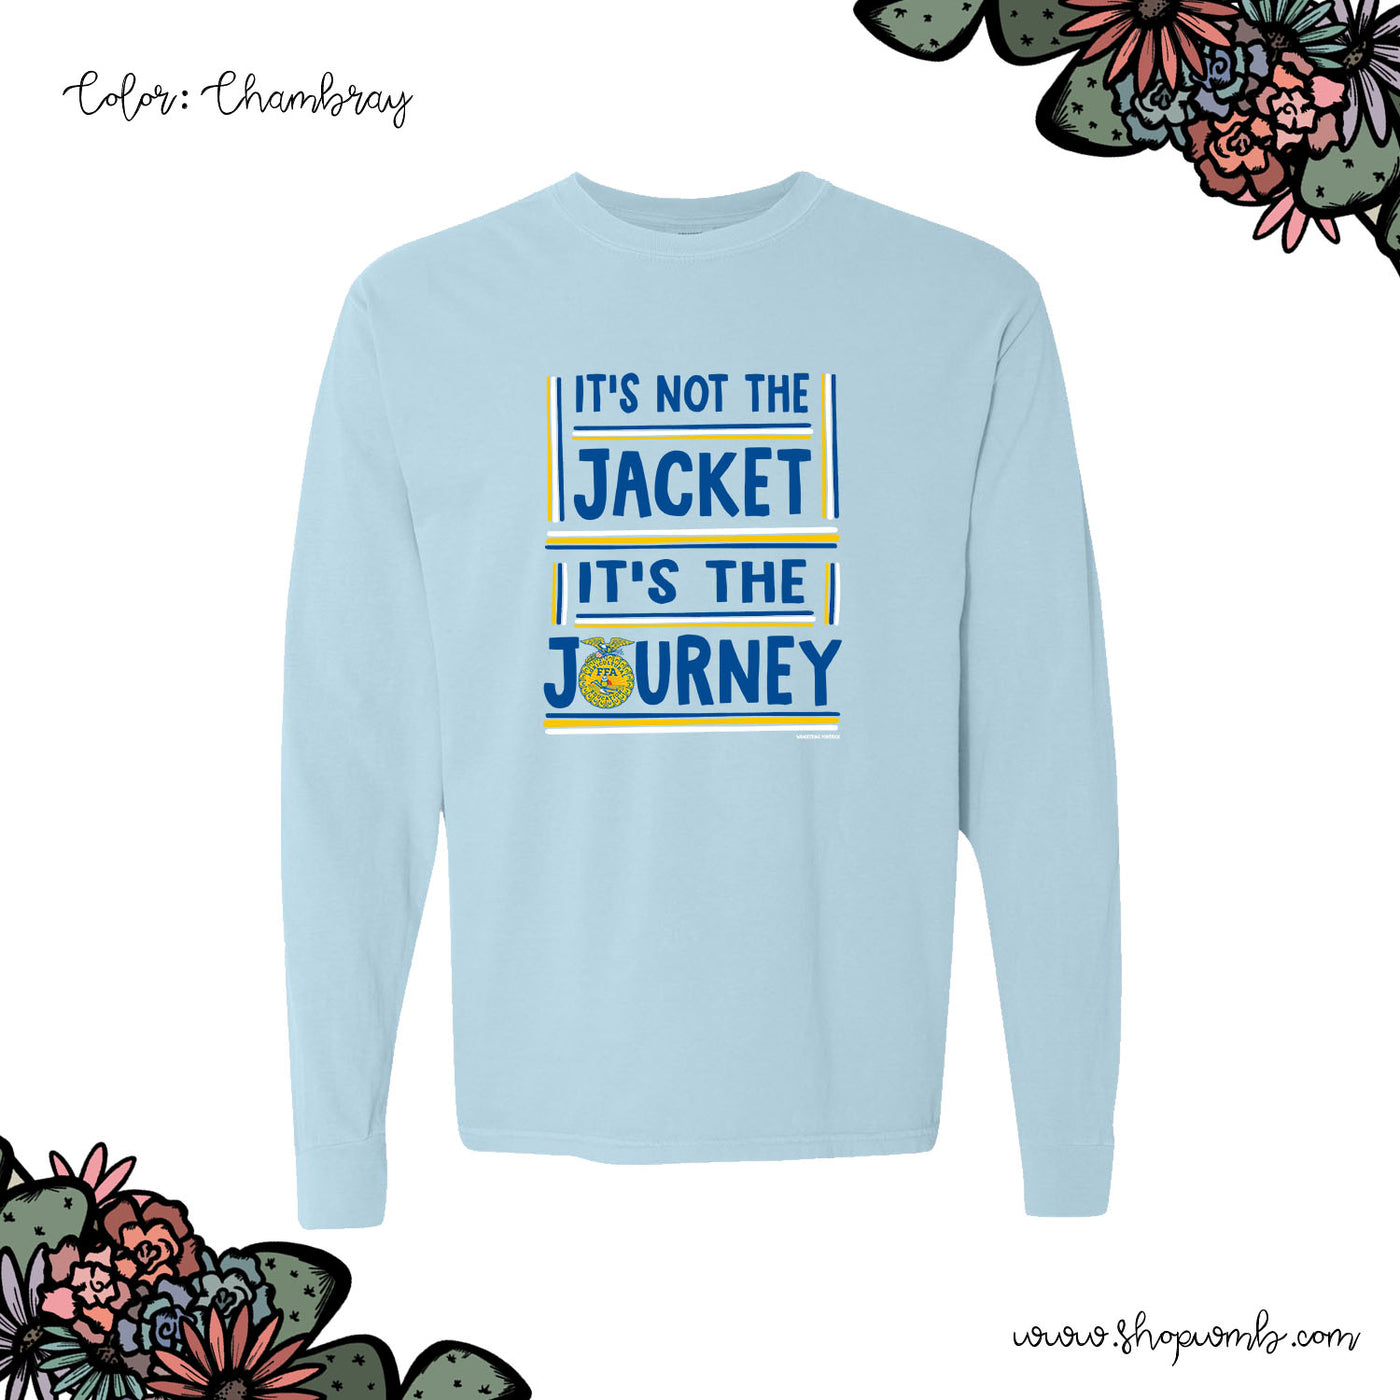 It's Not the jacket it's the journey LONG SLEEVE T-Shirt (S-3XL) - Multiple Colors!